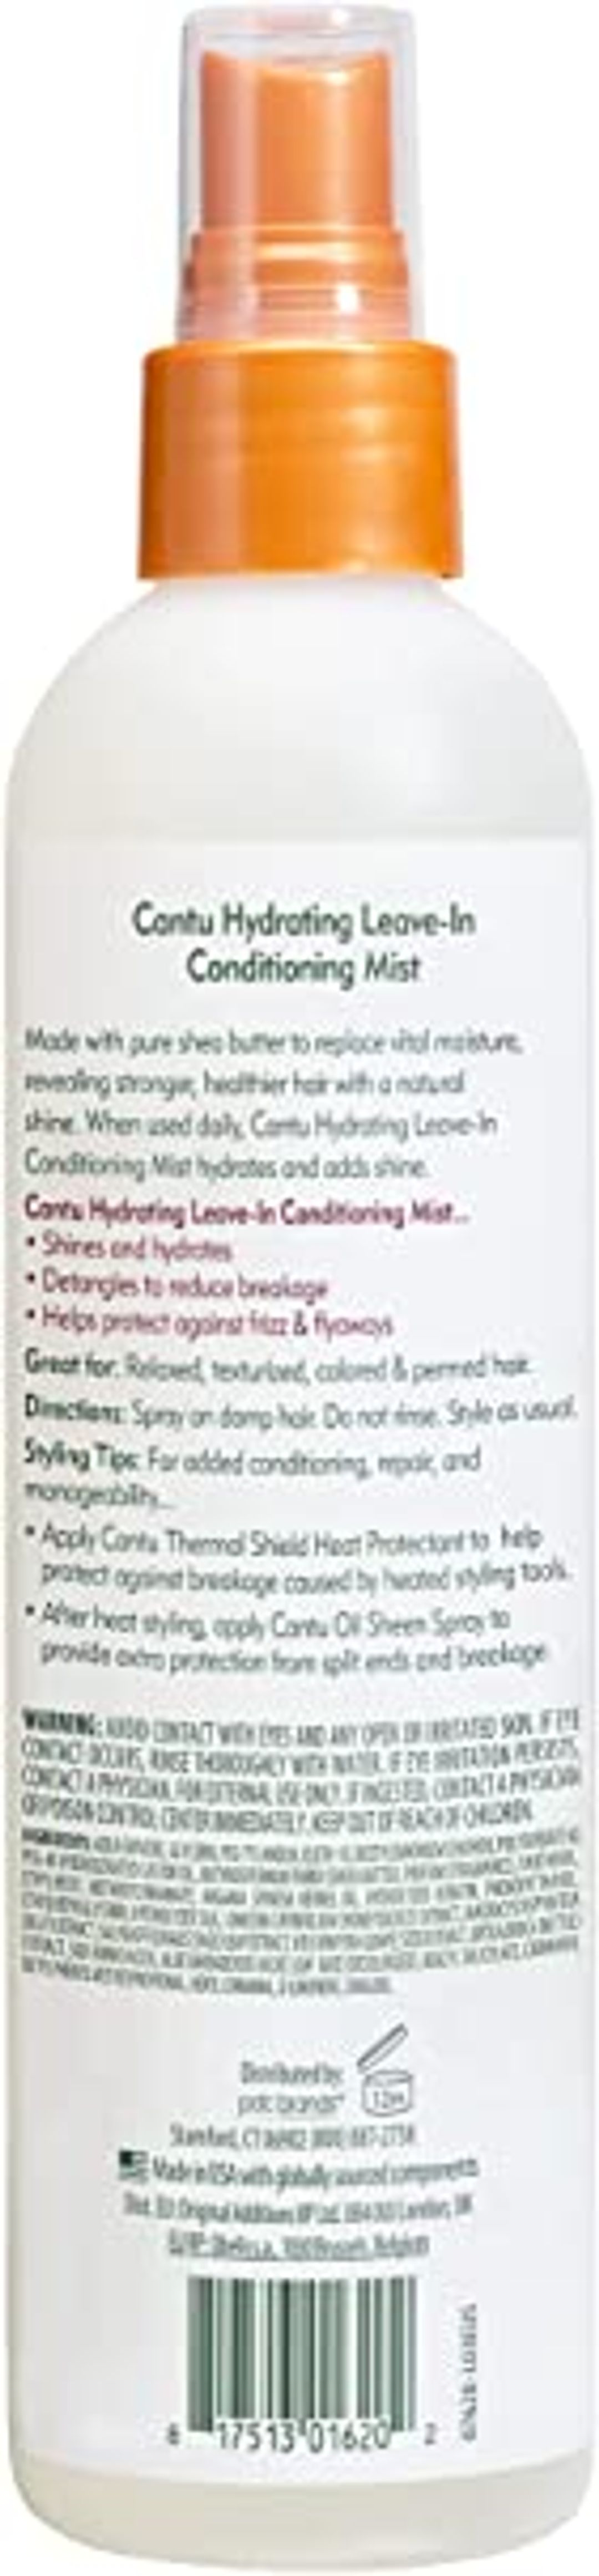 Cantu Shea Butter Hydrating Leave-in Conditioning Mist - 237ml